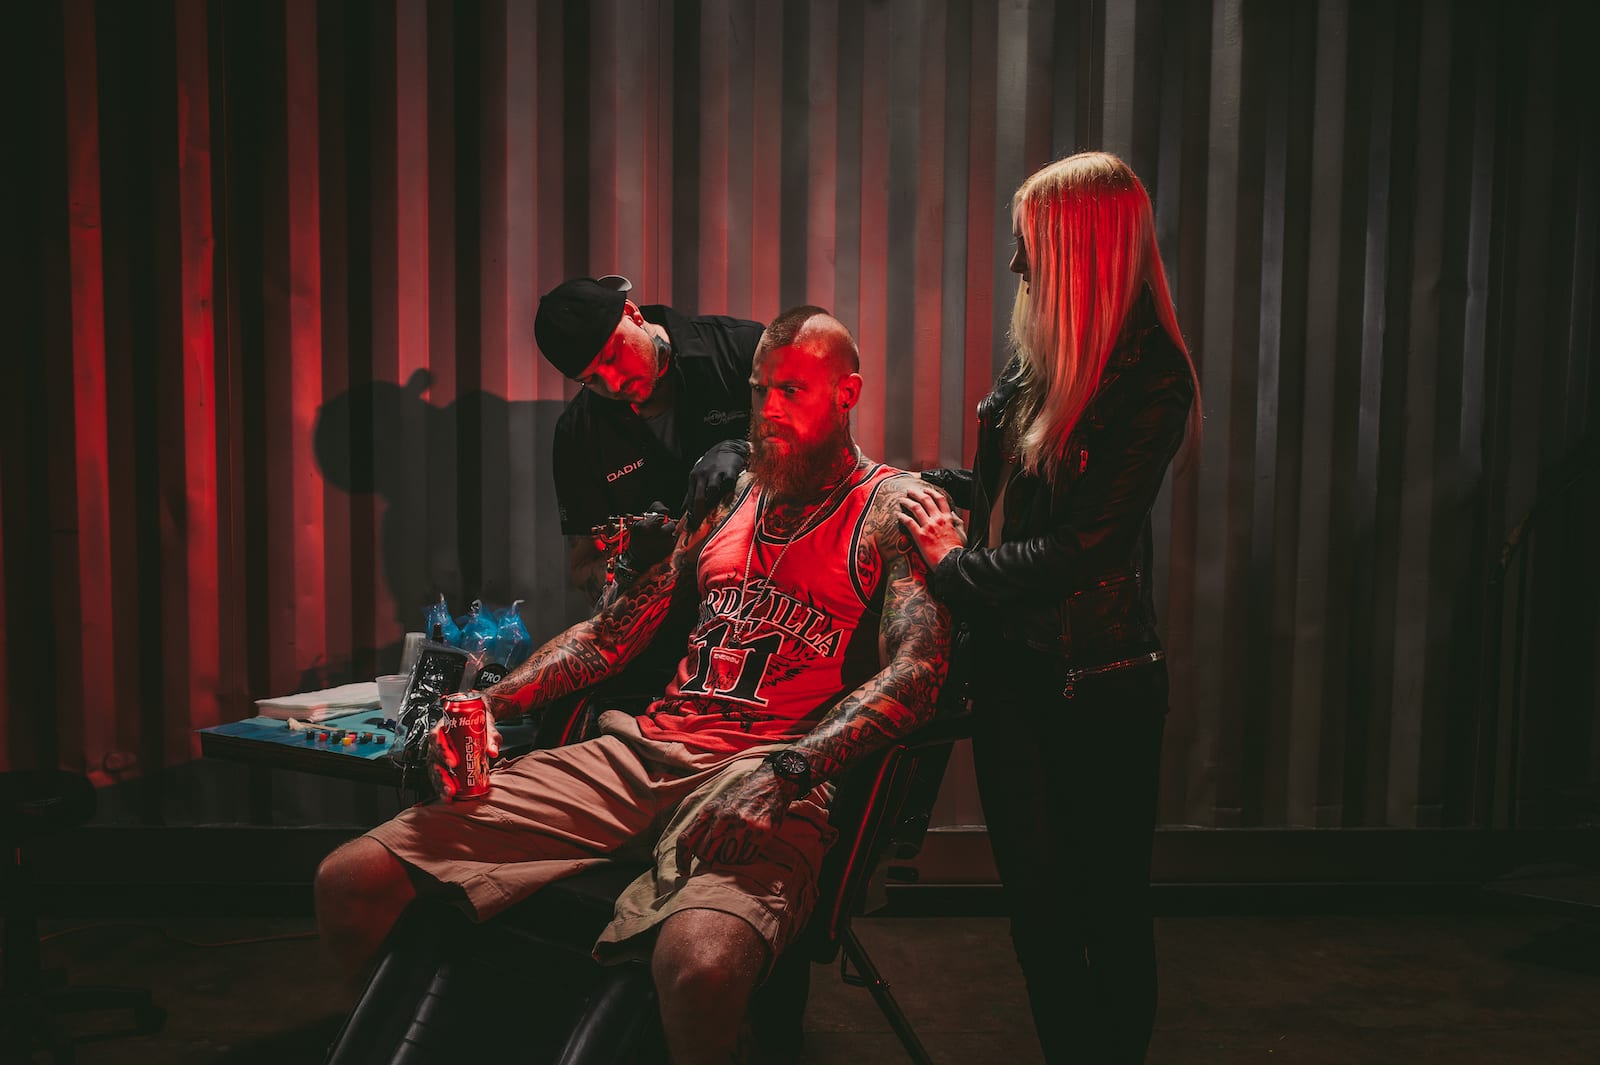 Hard Rock Energy Marketing by C&I Studios Bearded tattooed man holding Hard Rock Energy drinks with tattoo artist working on a tattoo with an assistant standing nearby